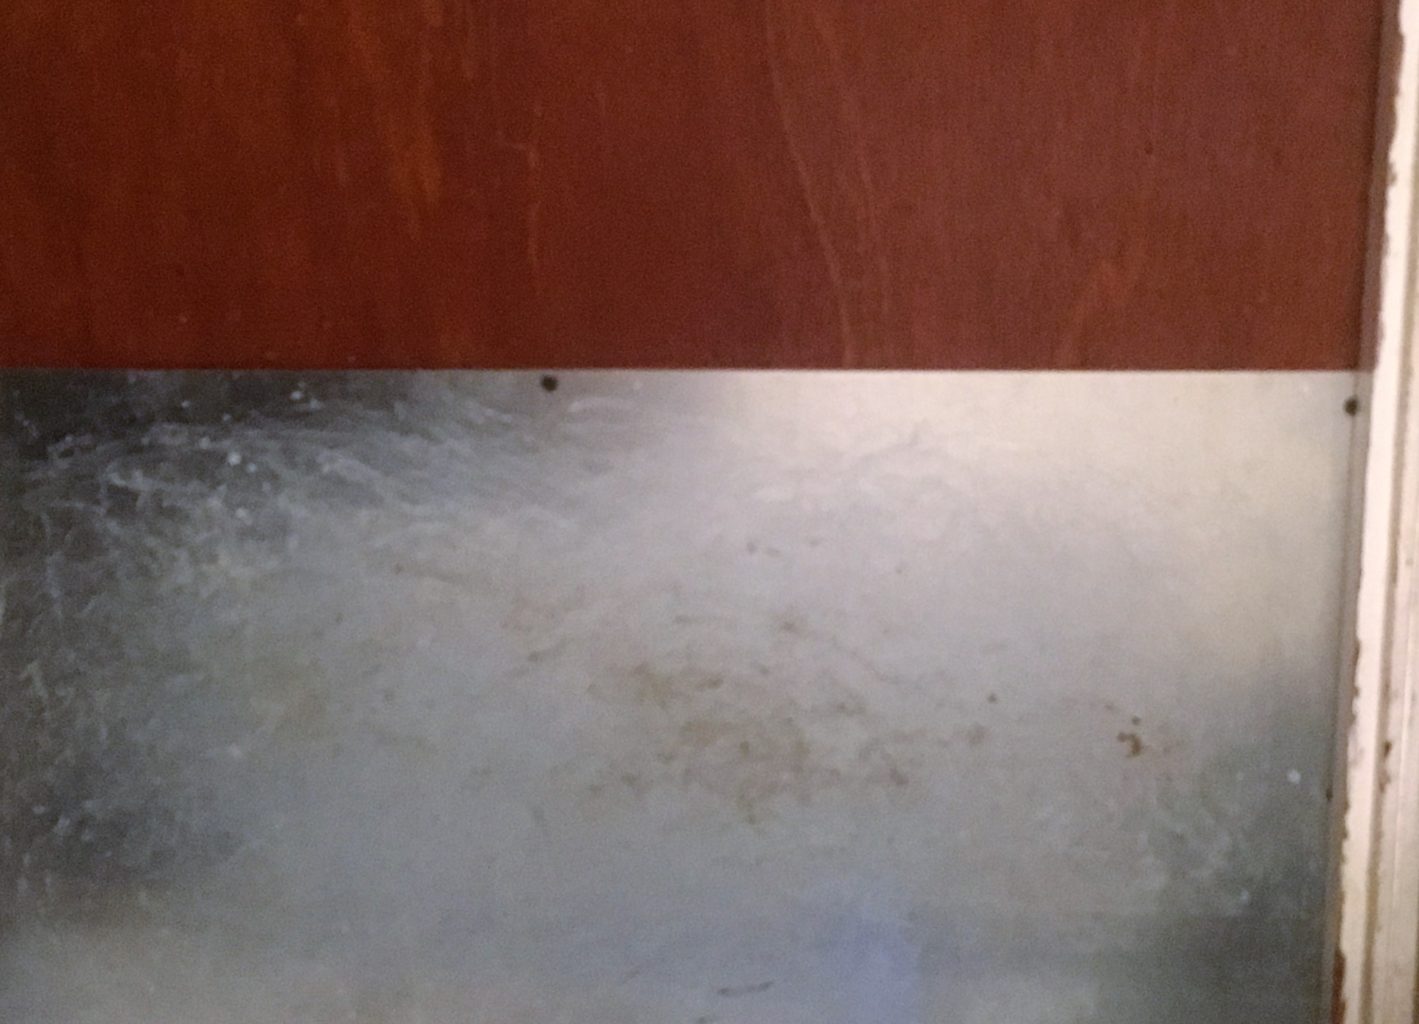 A silver-colored metal plate is installed across the bottom of a red-brown wooden door (to keep a Sulcata tortoise from digging through the door)